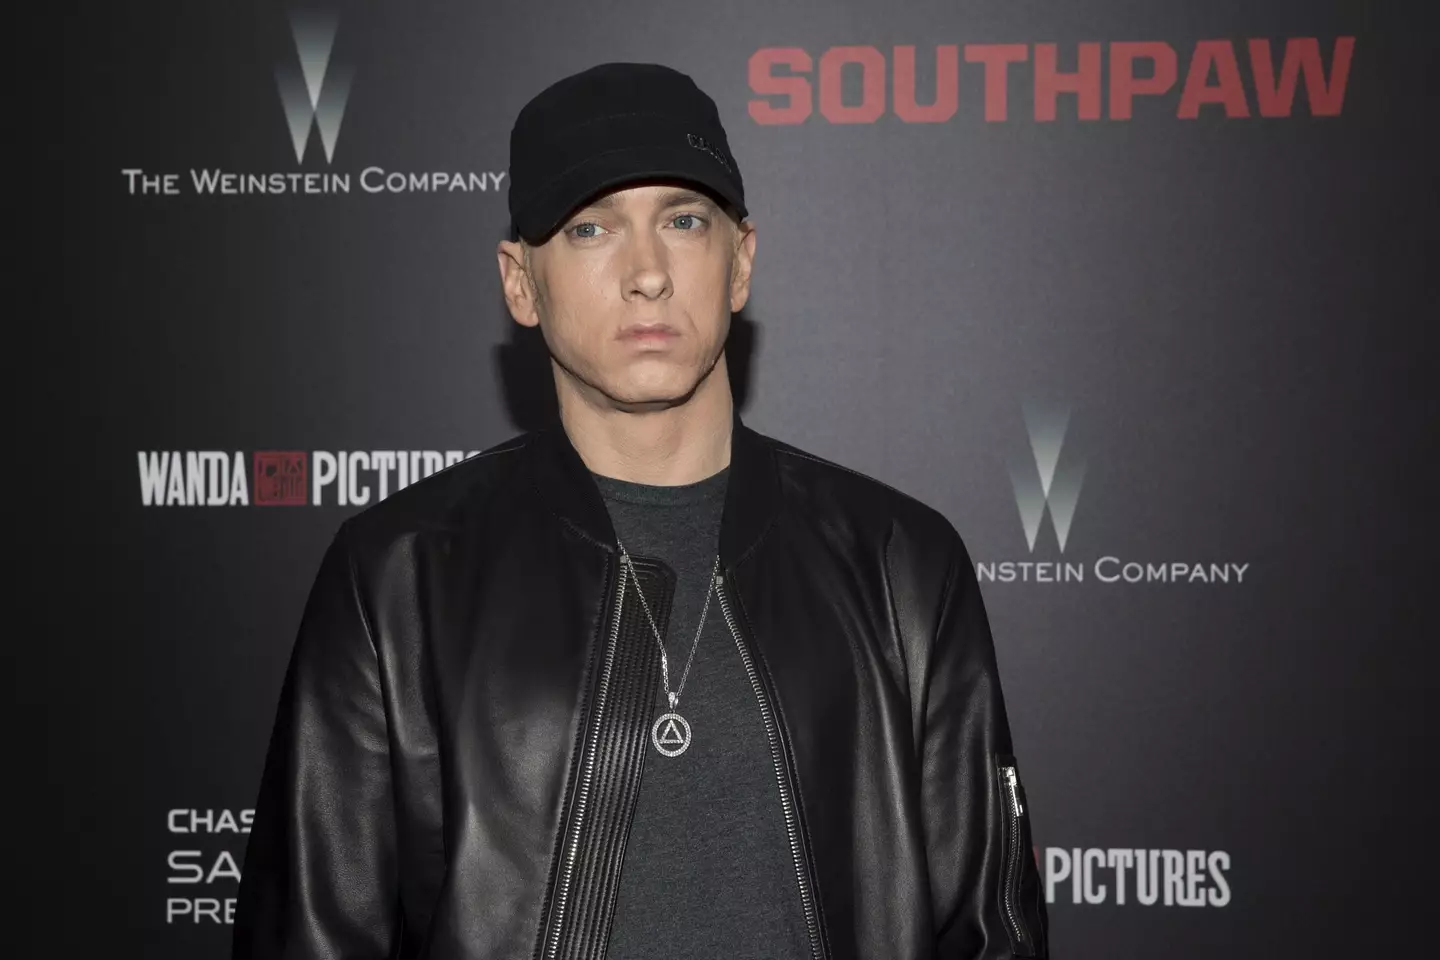 Eminem released a diss track titled 'Zeus' addressing his views in his lyrics.